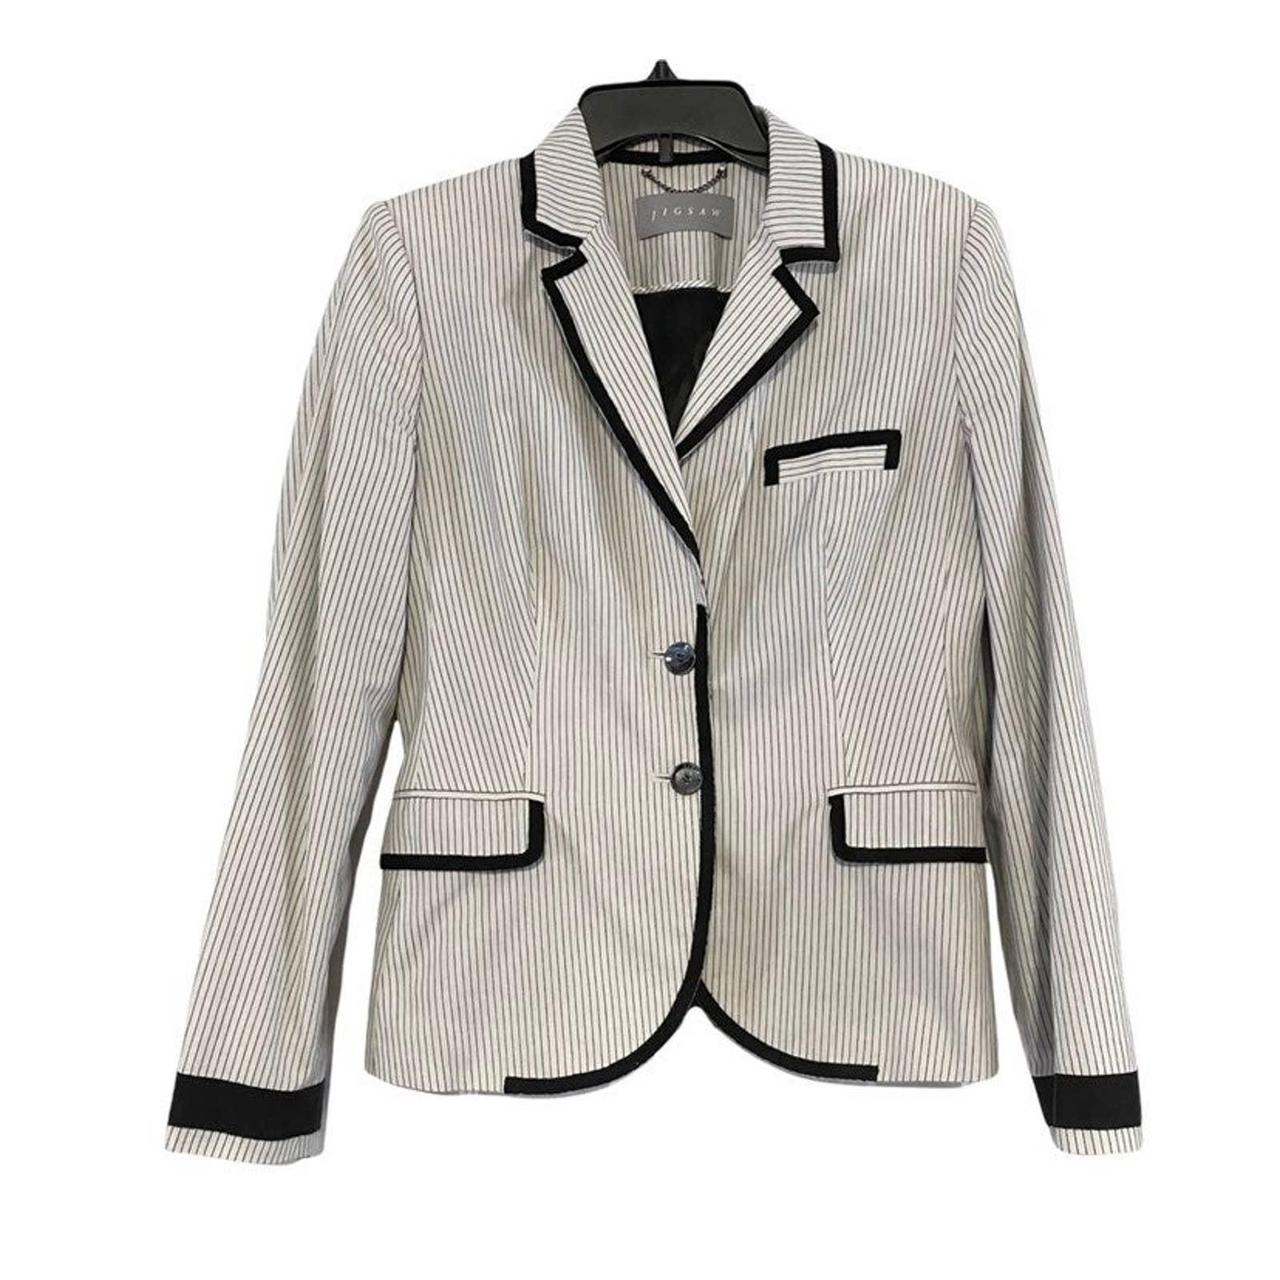 Product Image 1 - This is a suit jacket